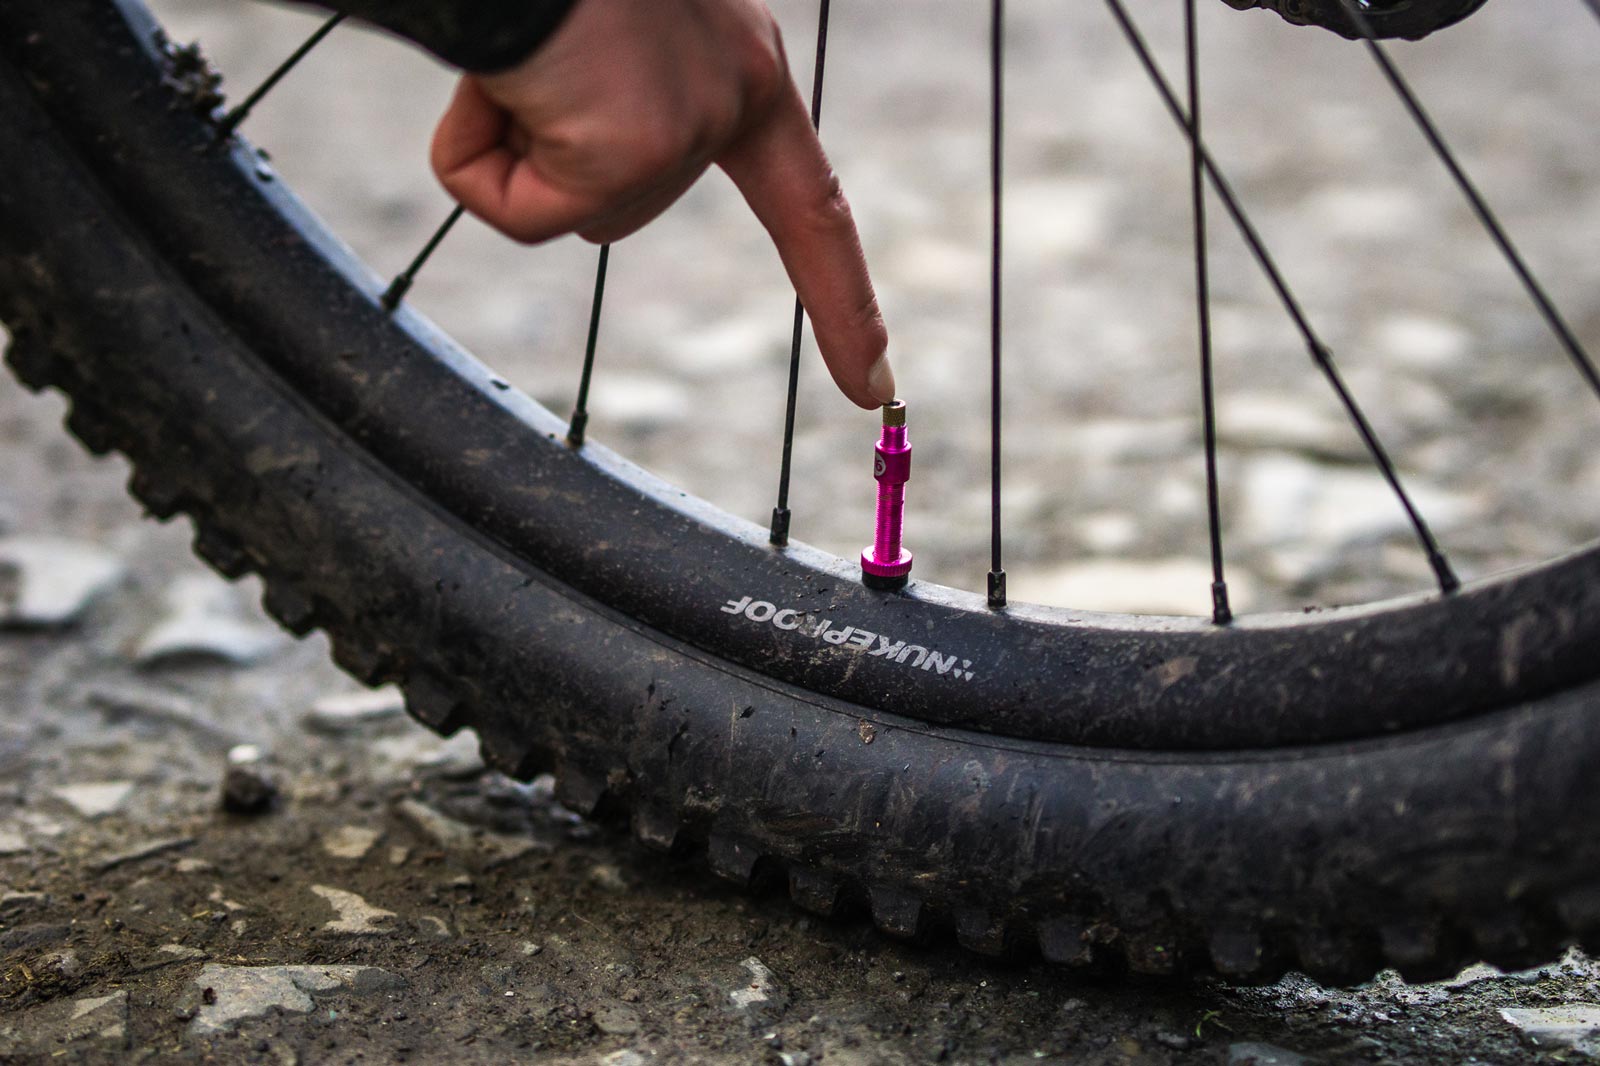 76 projects hi flow no clog tubeless valve review